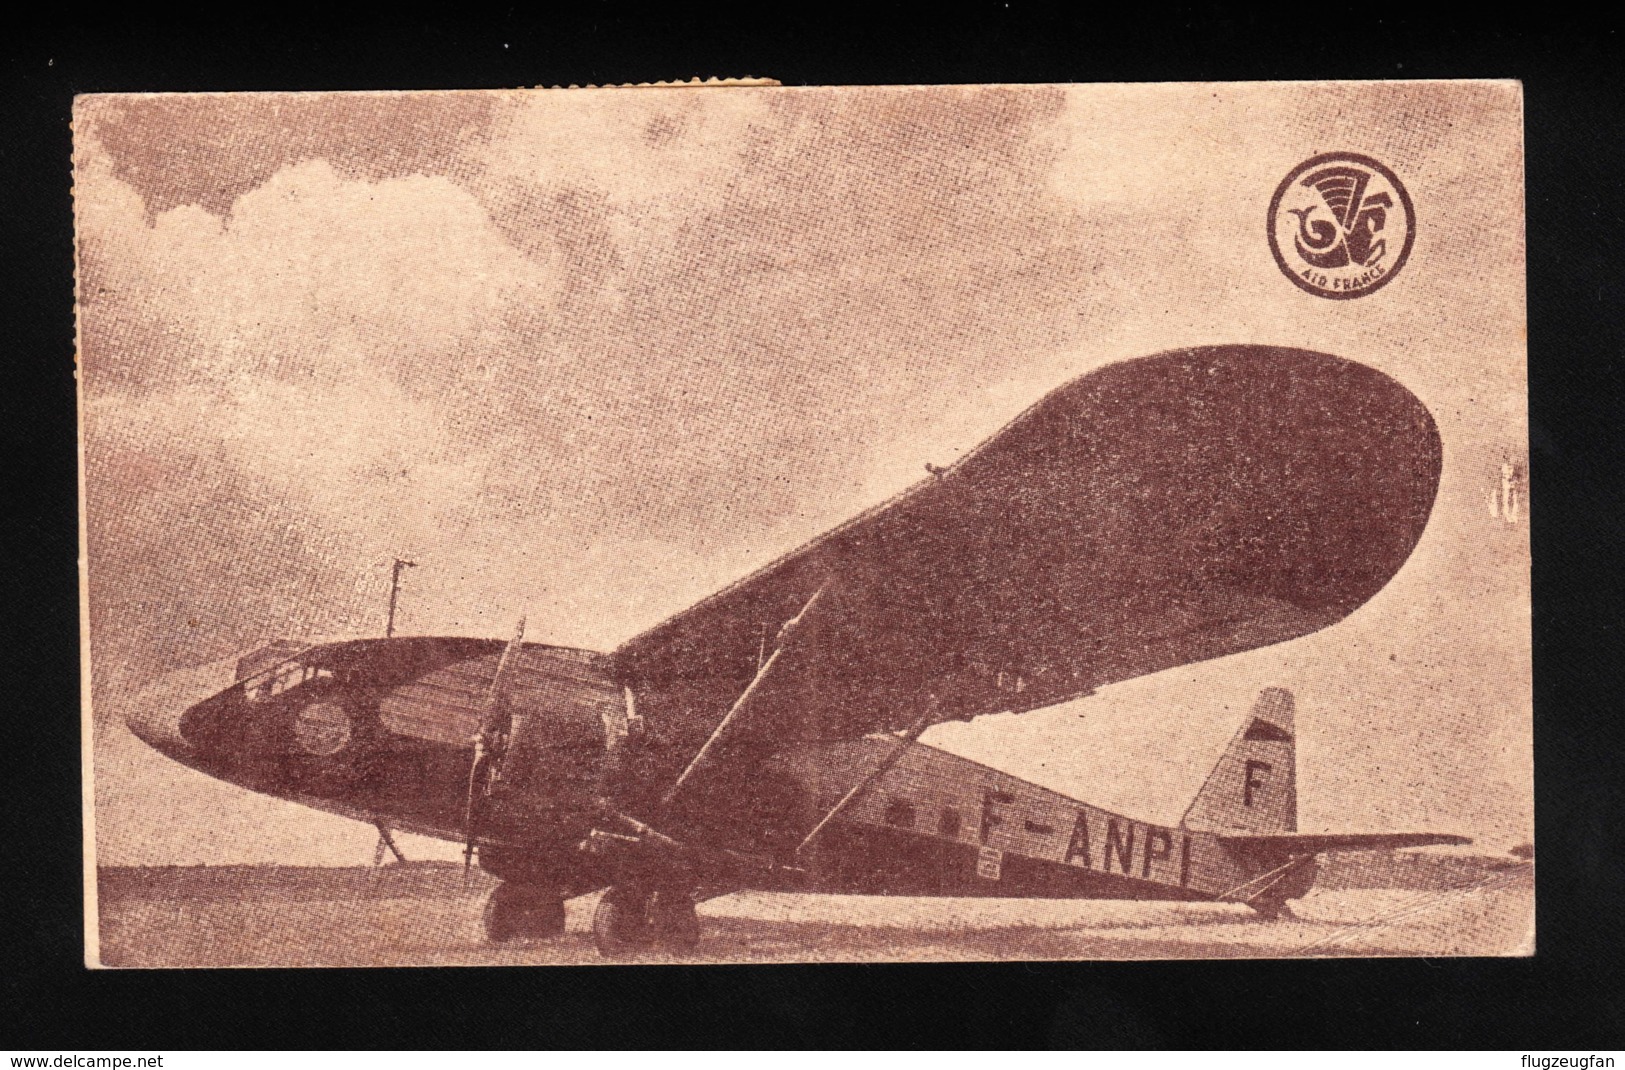 Air France Faucett Lan Chile Potez 62 Peru 1937 Airmail Postcard Airline Issue - 1919-1938: Between Wars